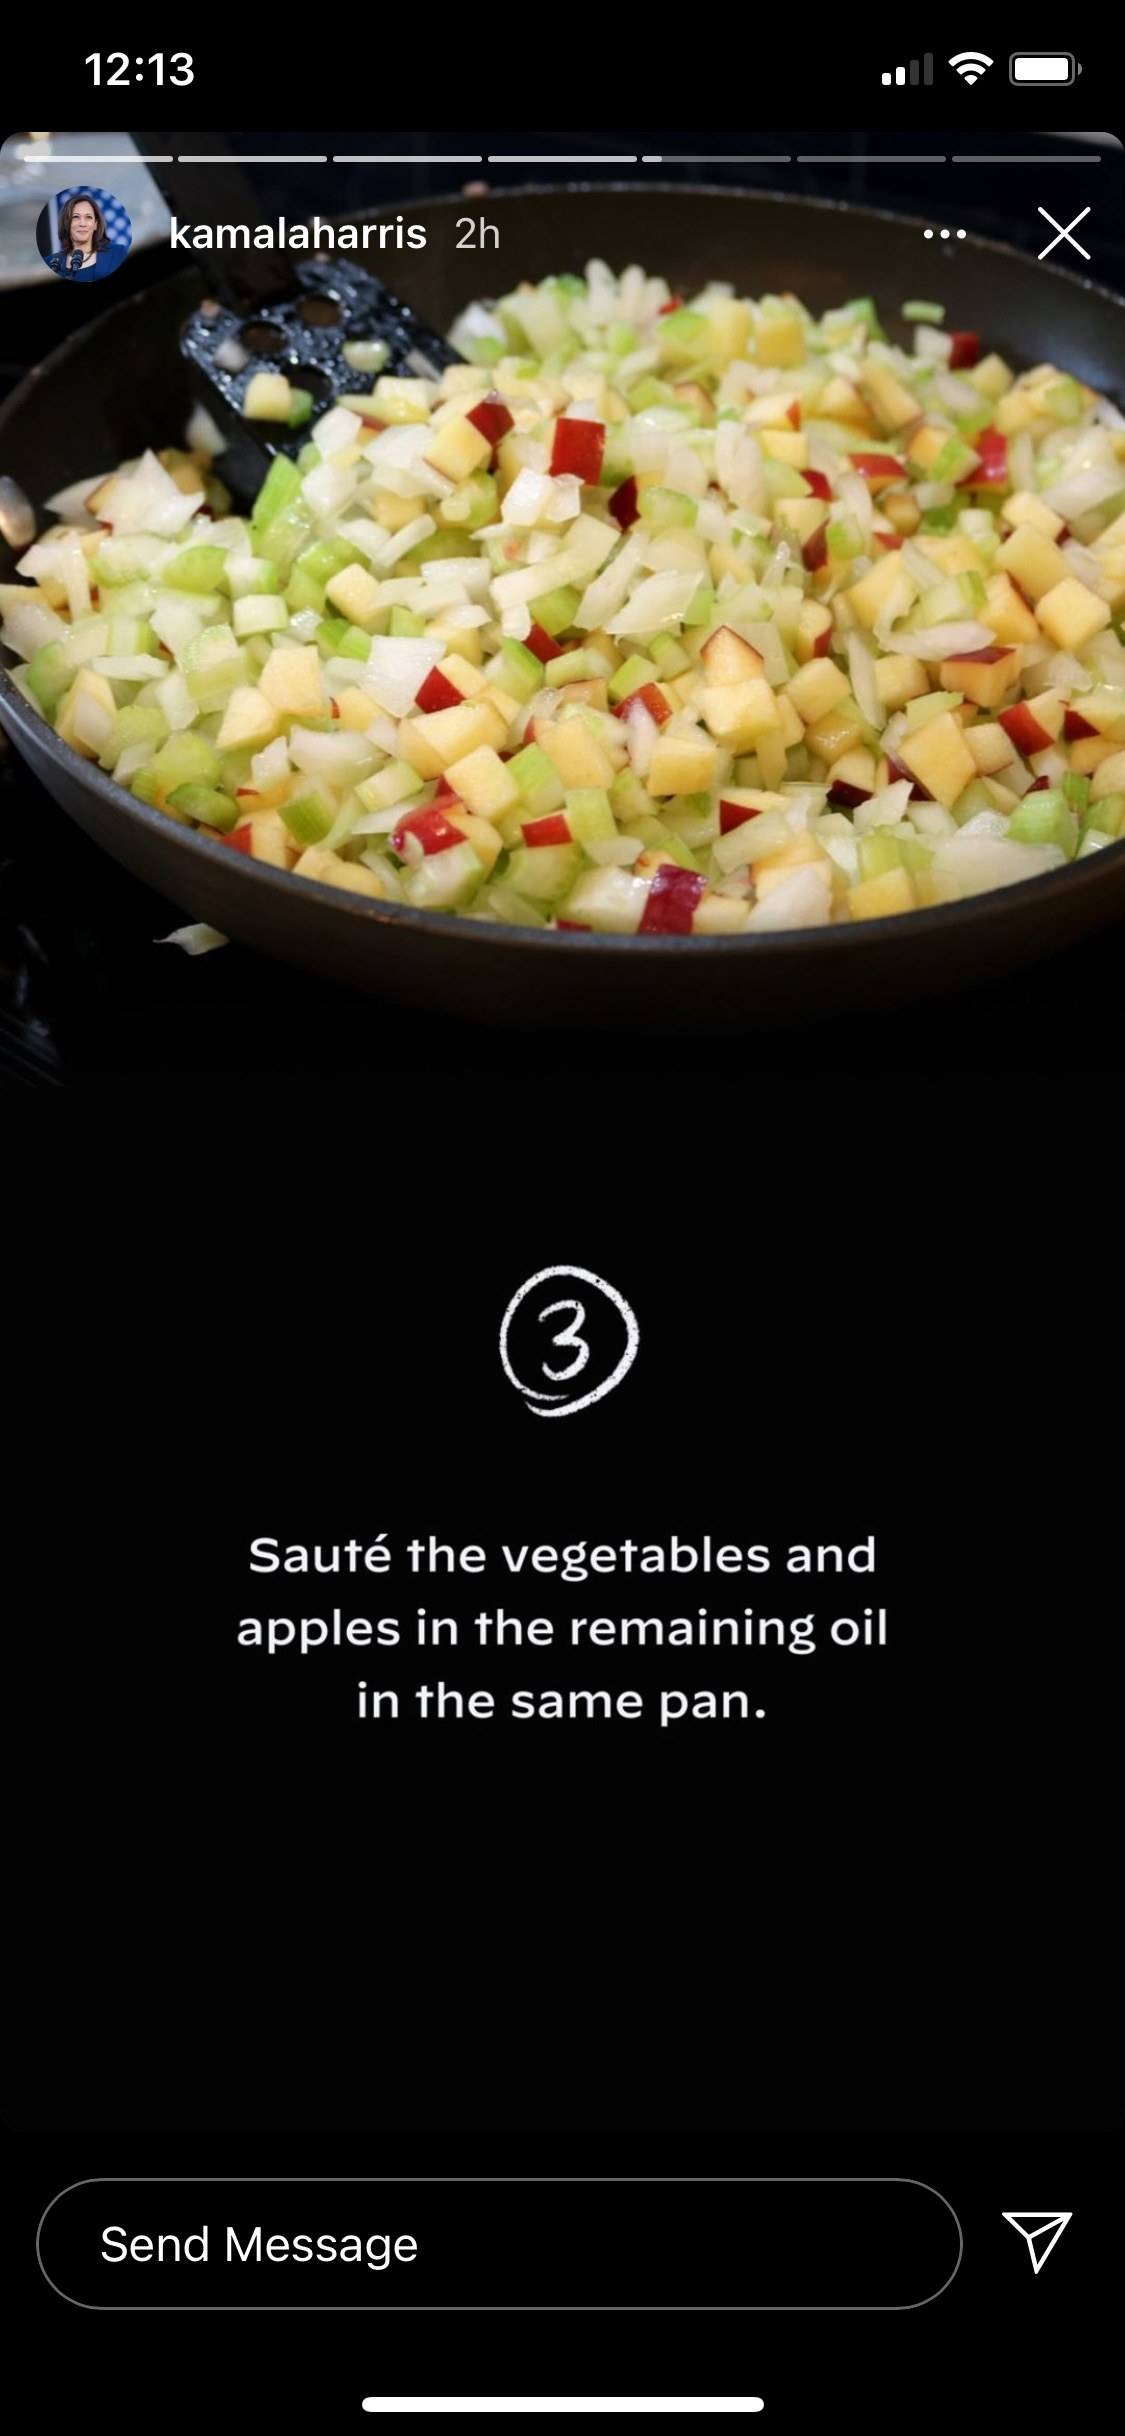 Diced apples, celery, and onion in a pan